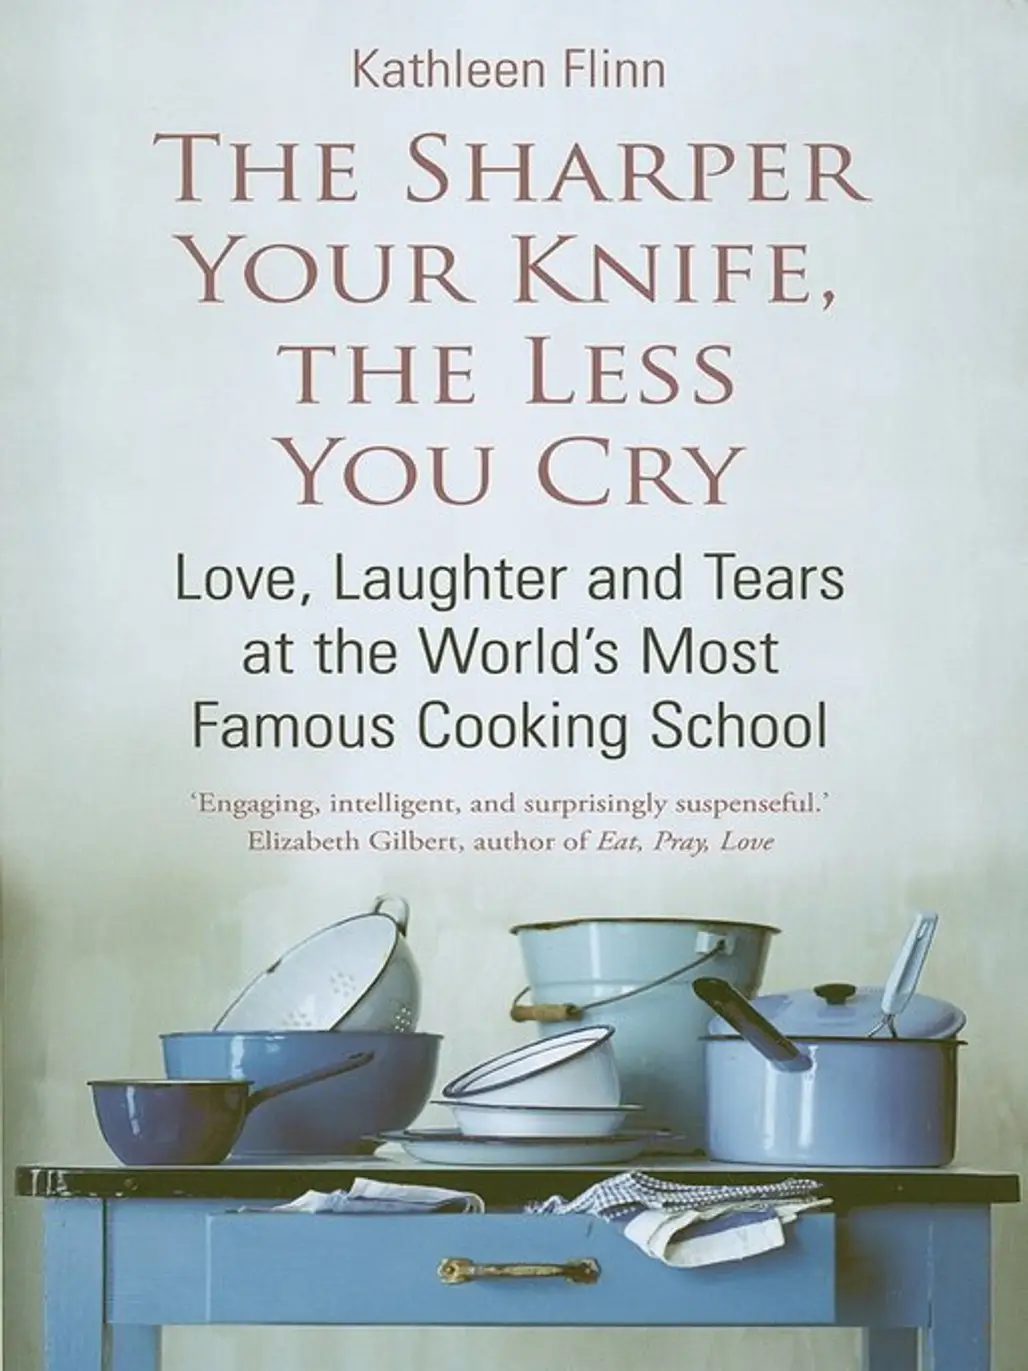 The Sharper the Knife, the Less You Cry by Kathleen Flinn